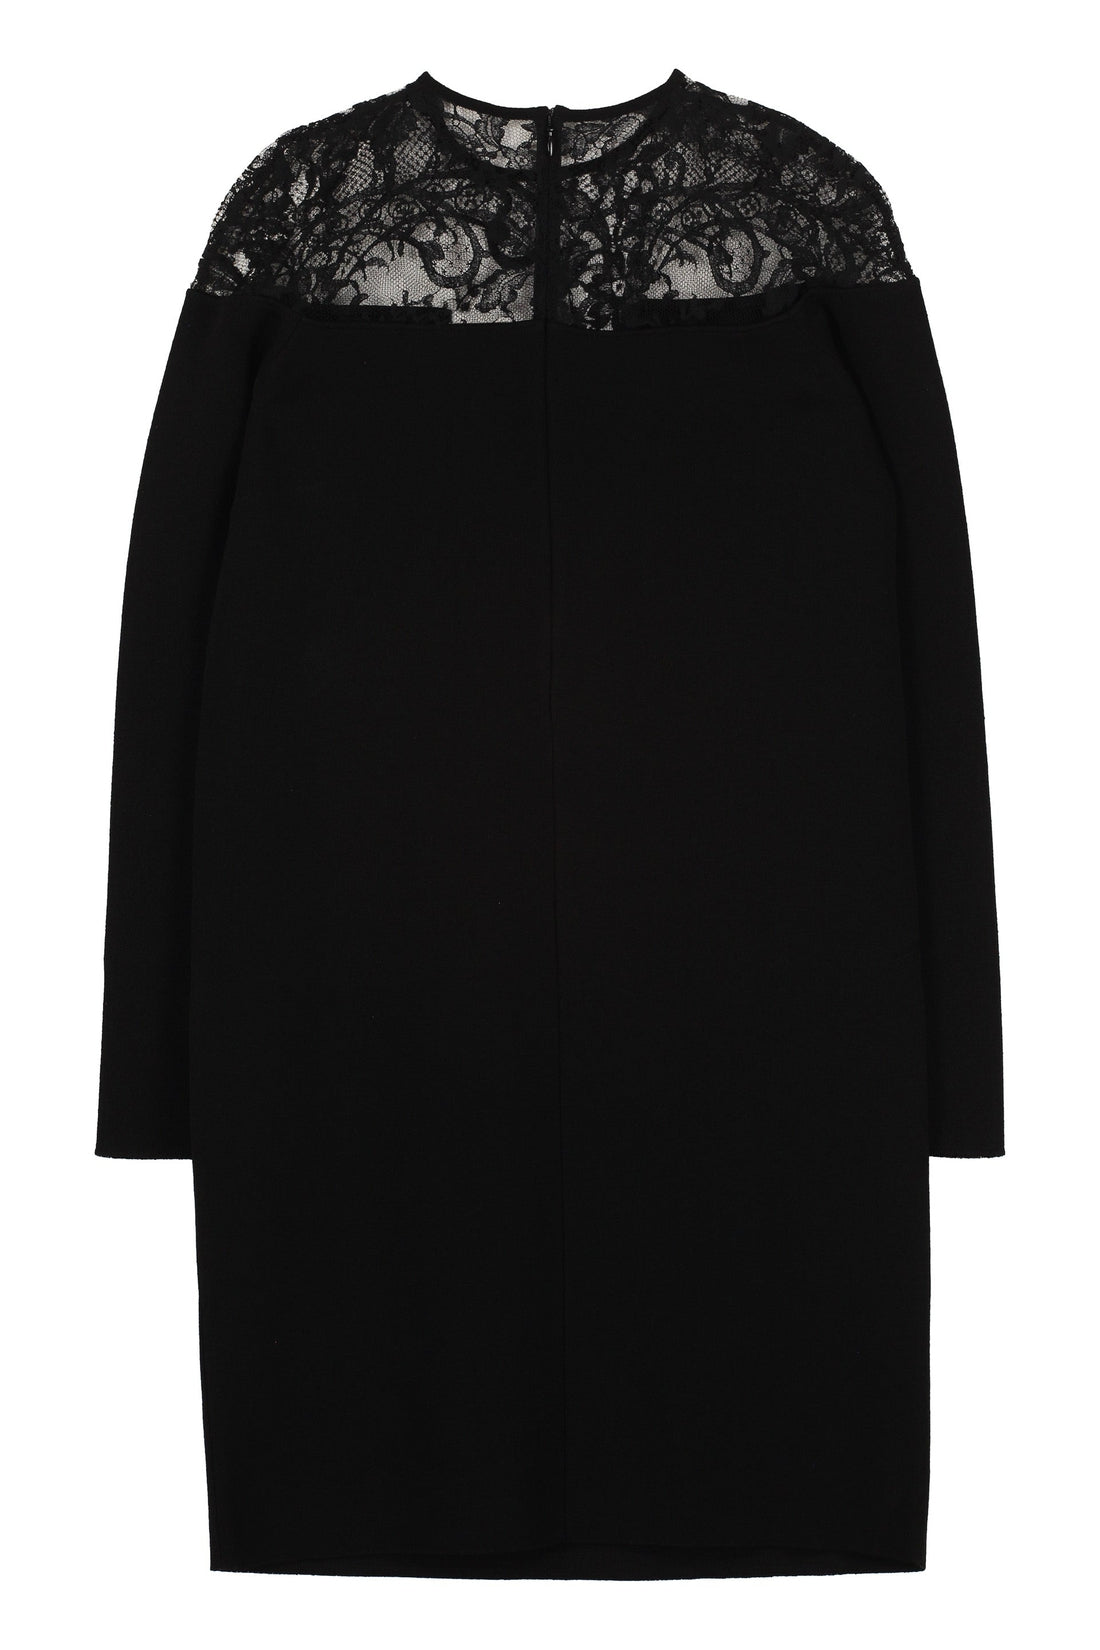 Givenchy-OUTLET-SALE-Lace detail knitted dress-ARCHIVIST